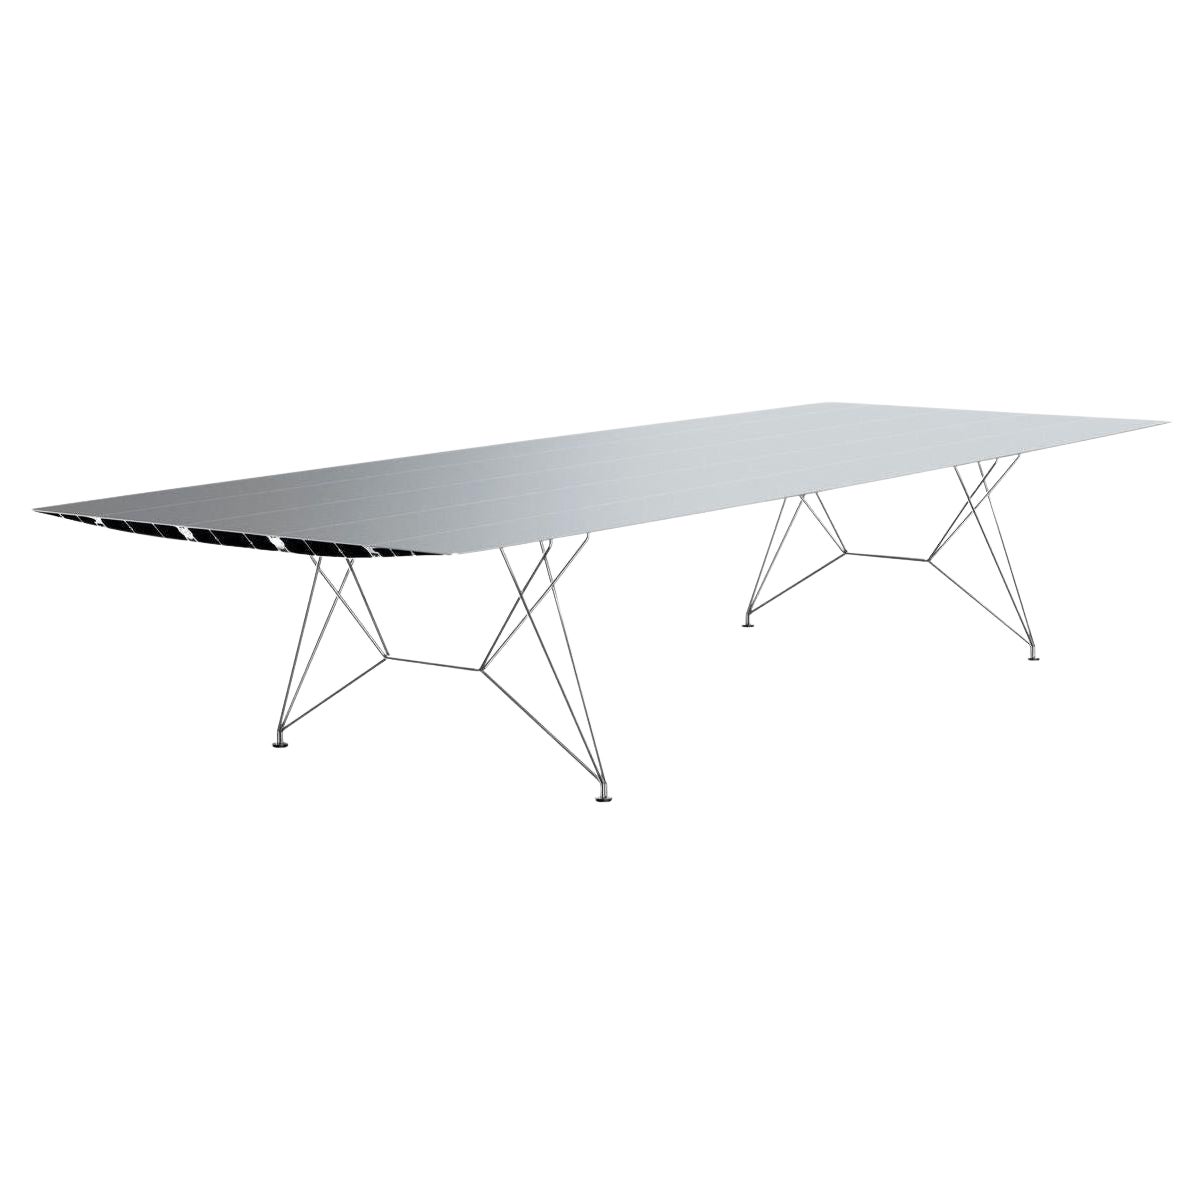 Big Stainless Steel Table B by Konstantin Grcic